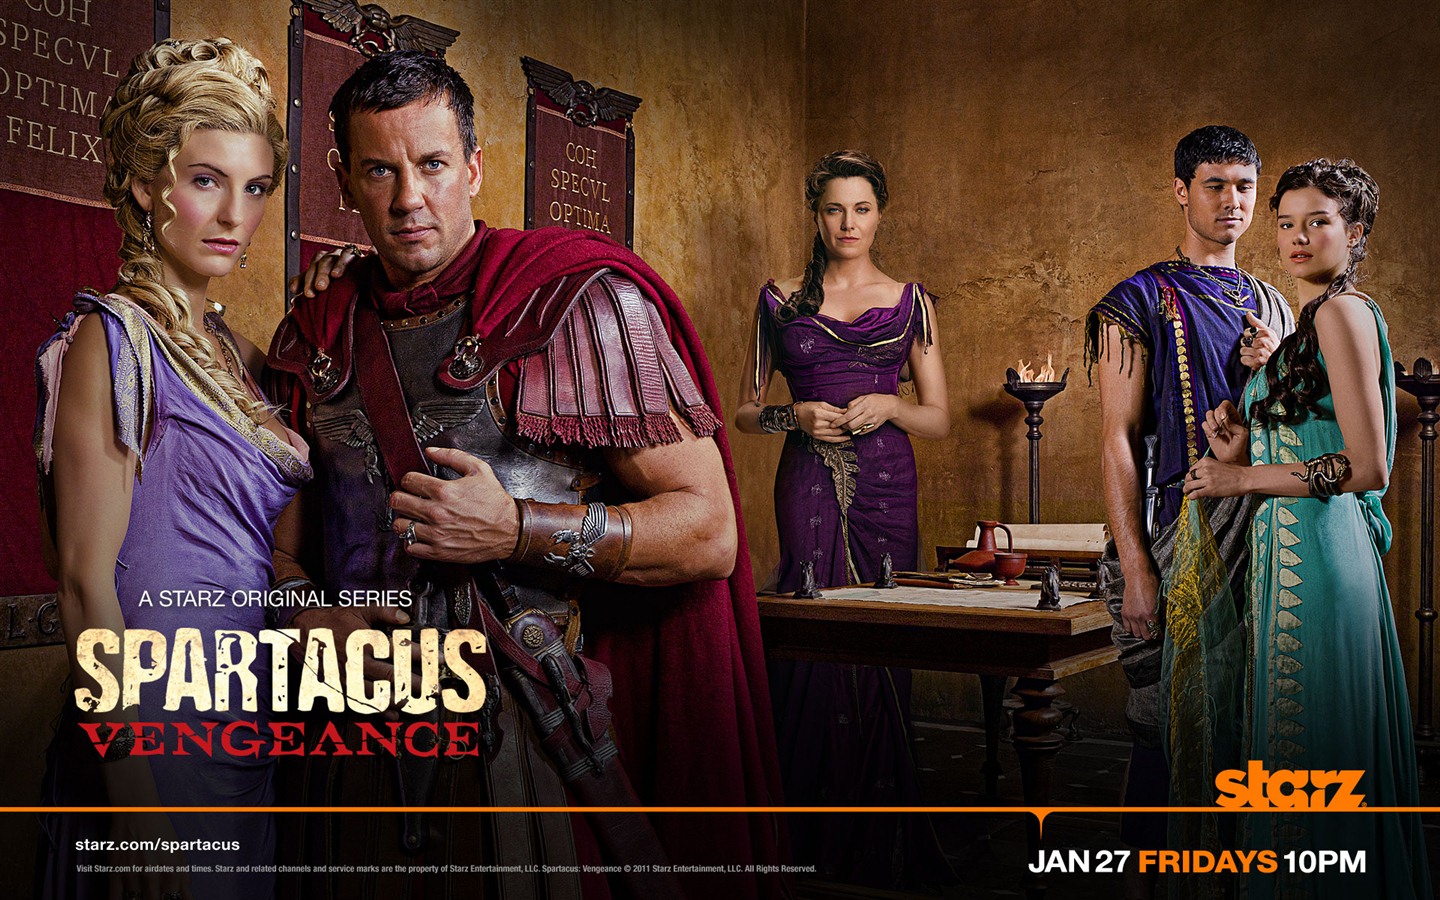 Spartacus: Vengeance HD wallpapers #10 - 1440x900